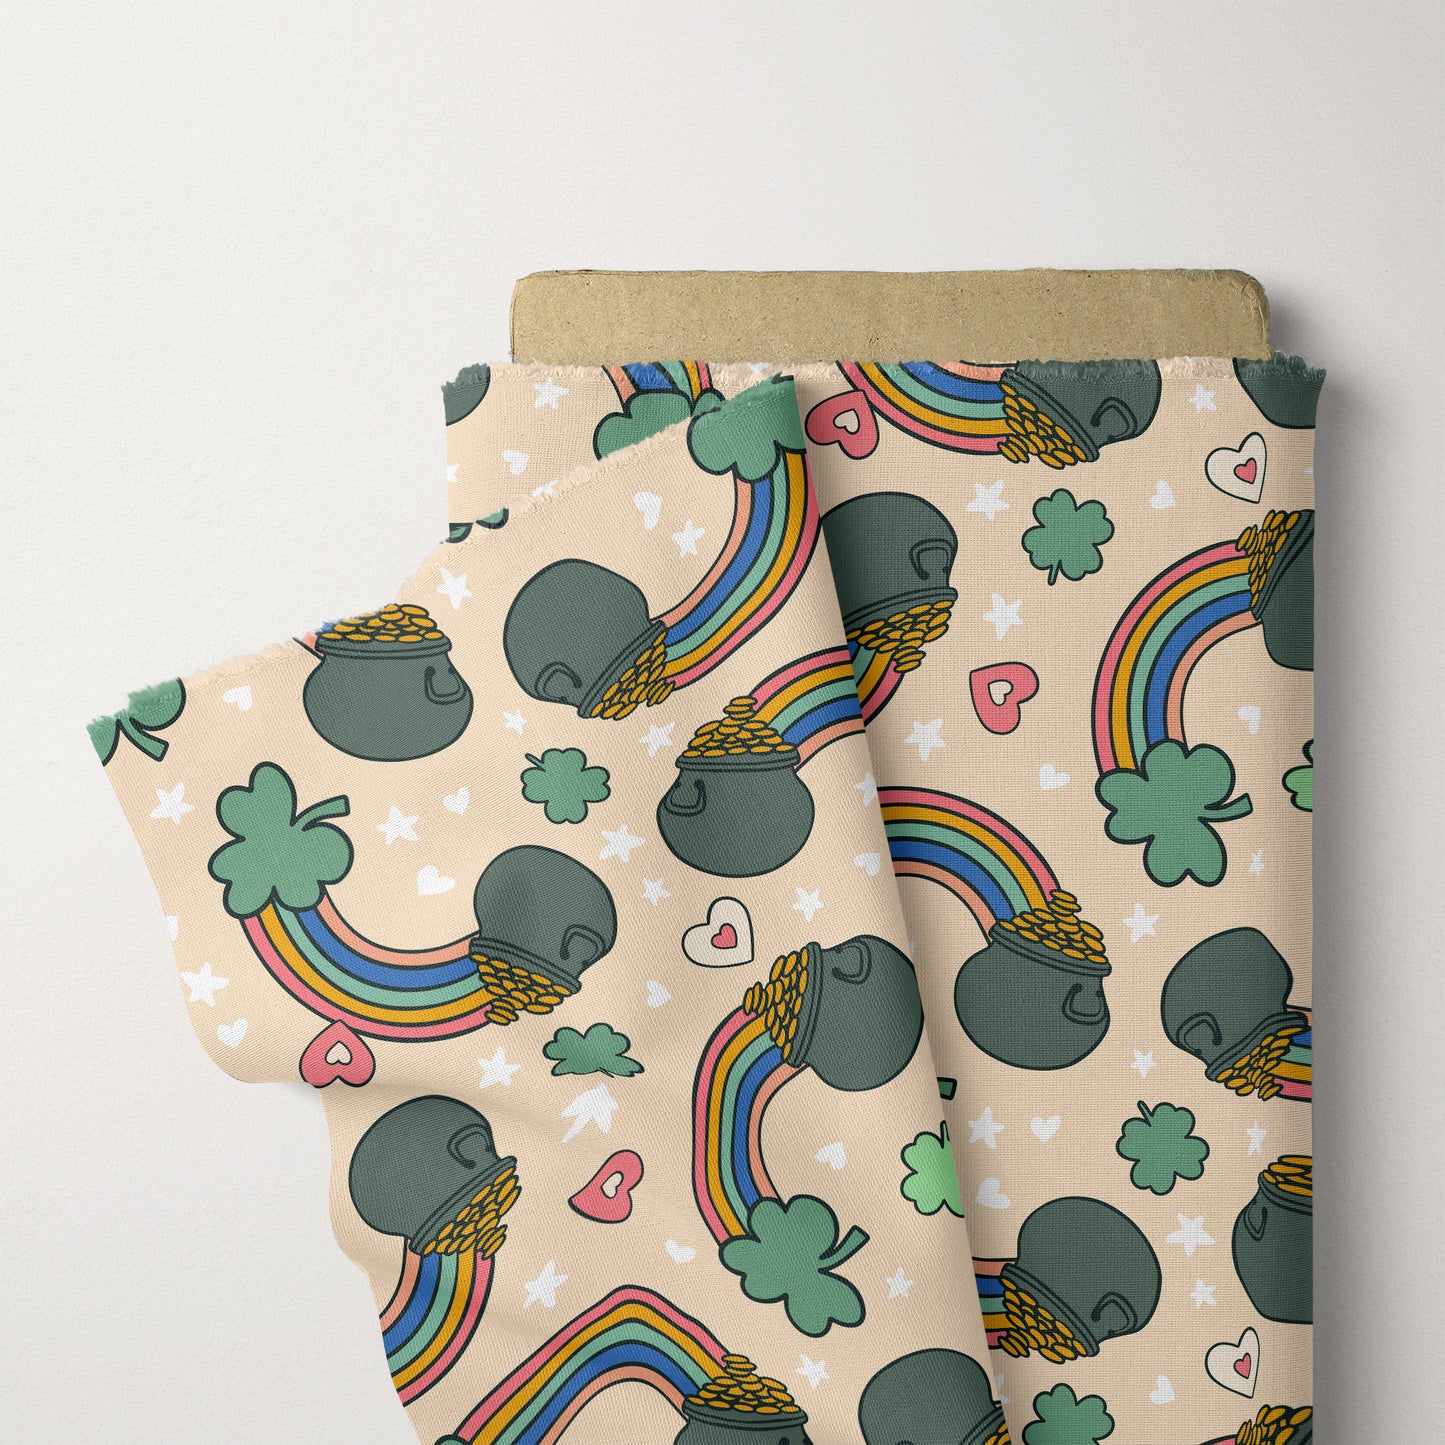 St Patrick’s  Pattern Rainbow Seamless File for Fabric Sublimation